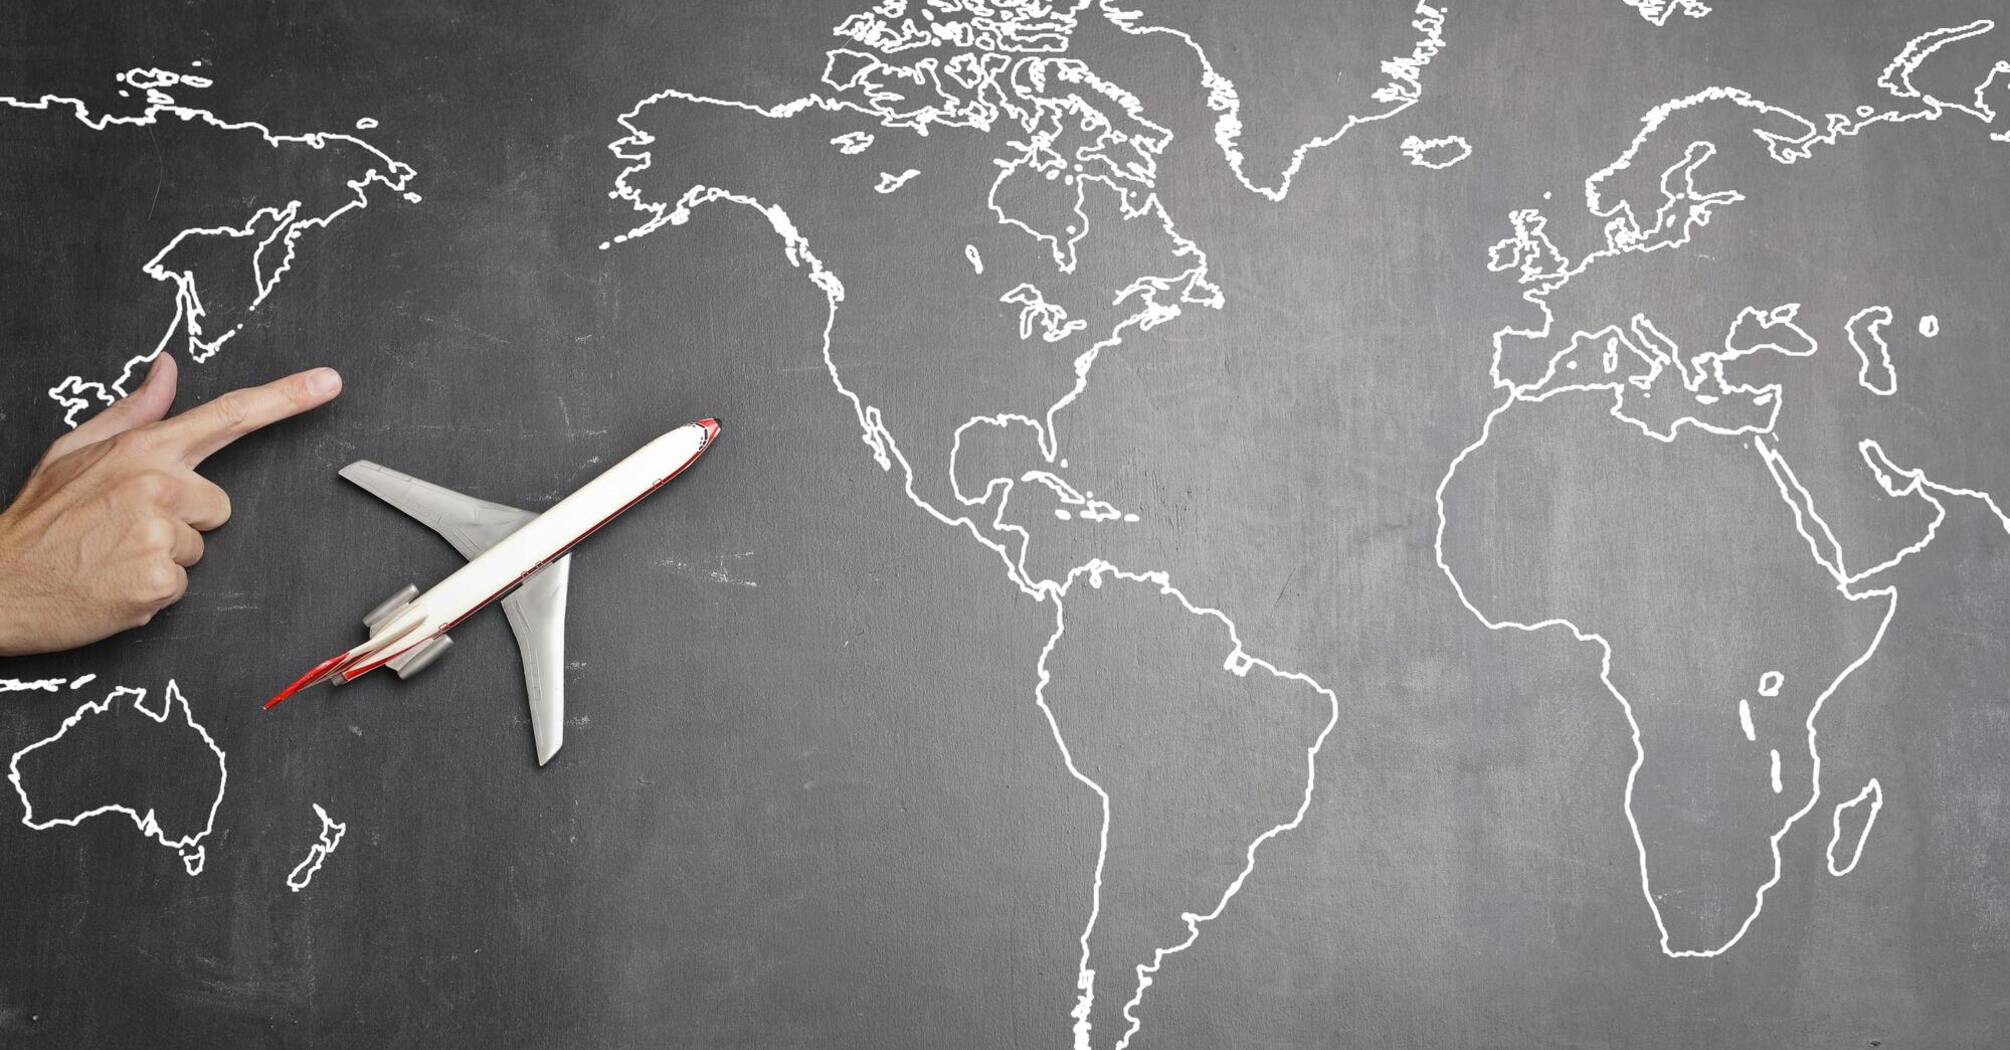 A world map outlined in white on a black chalkboard with a model airplane